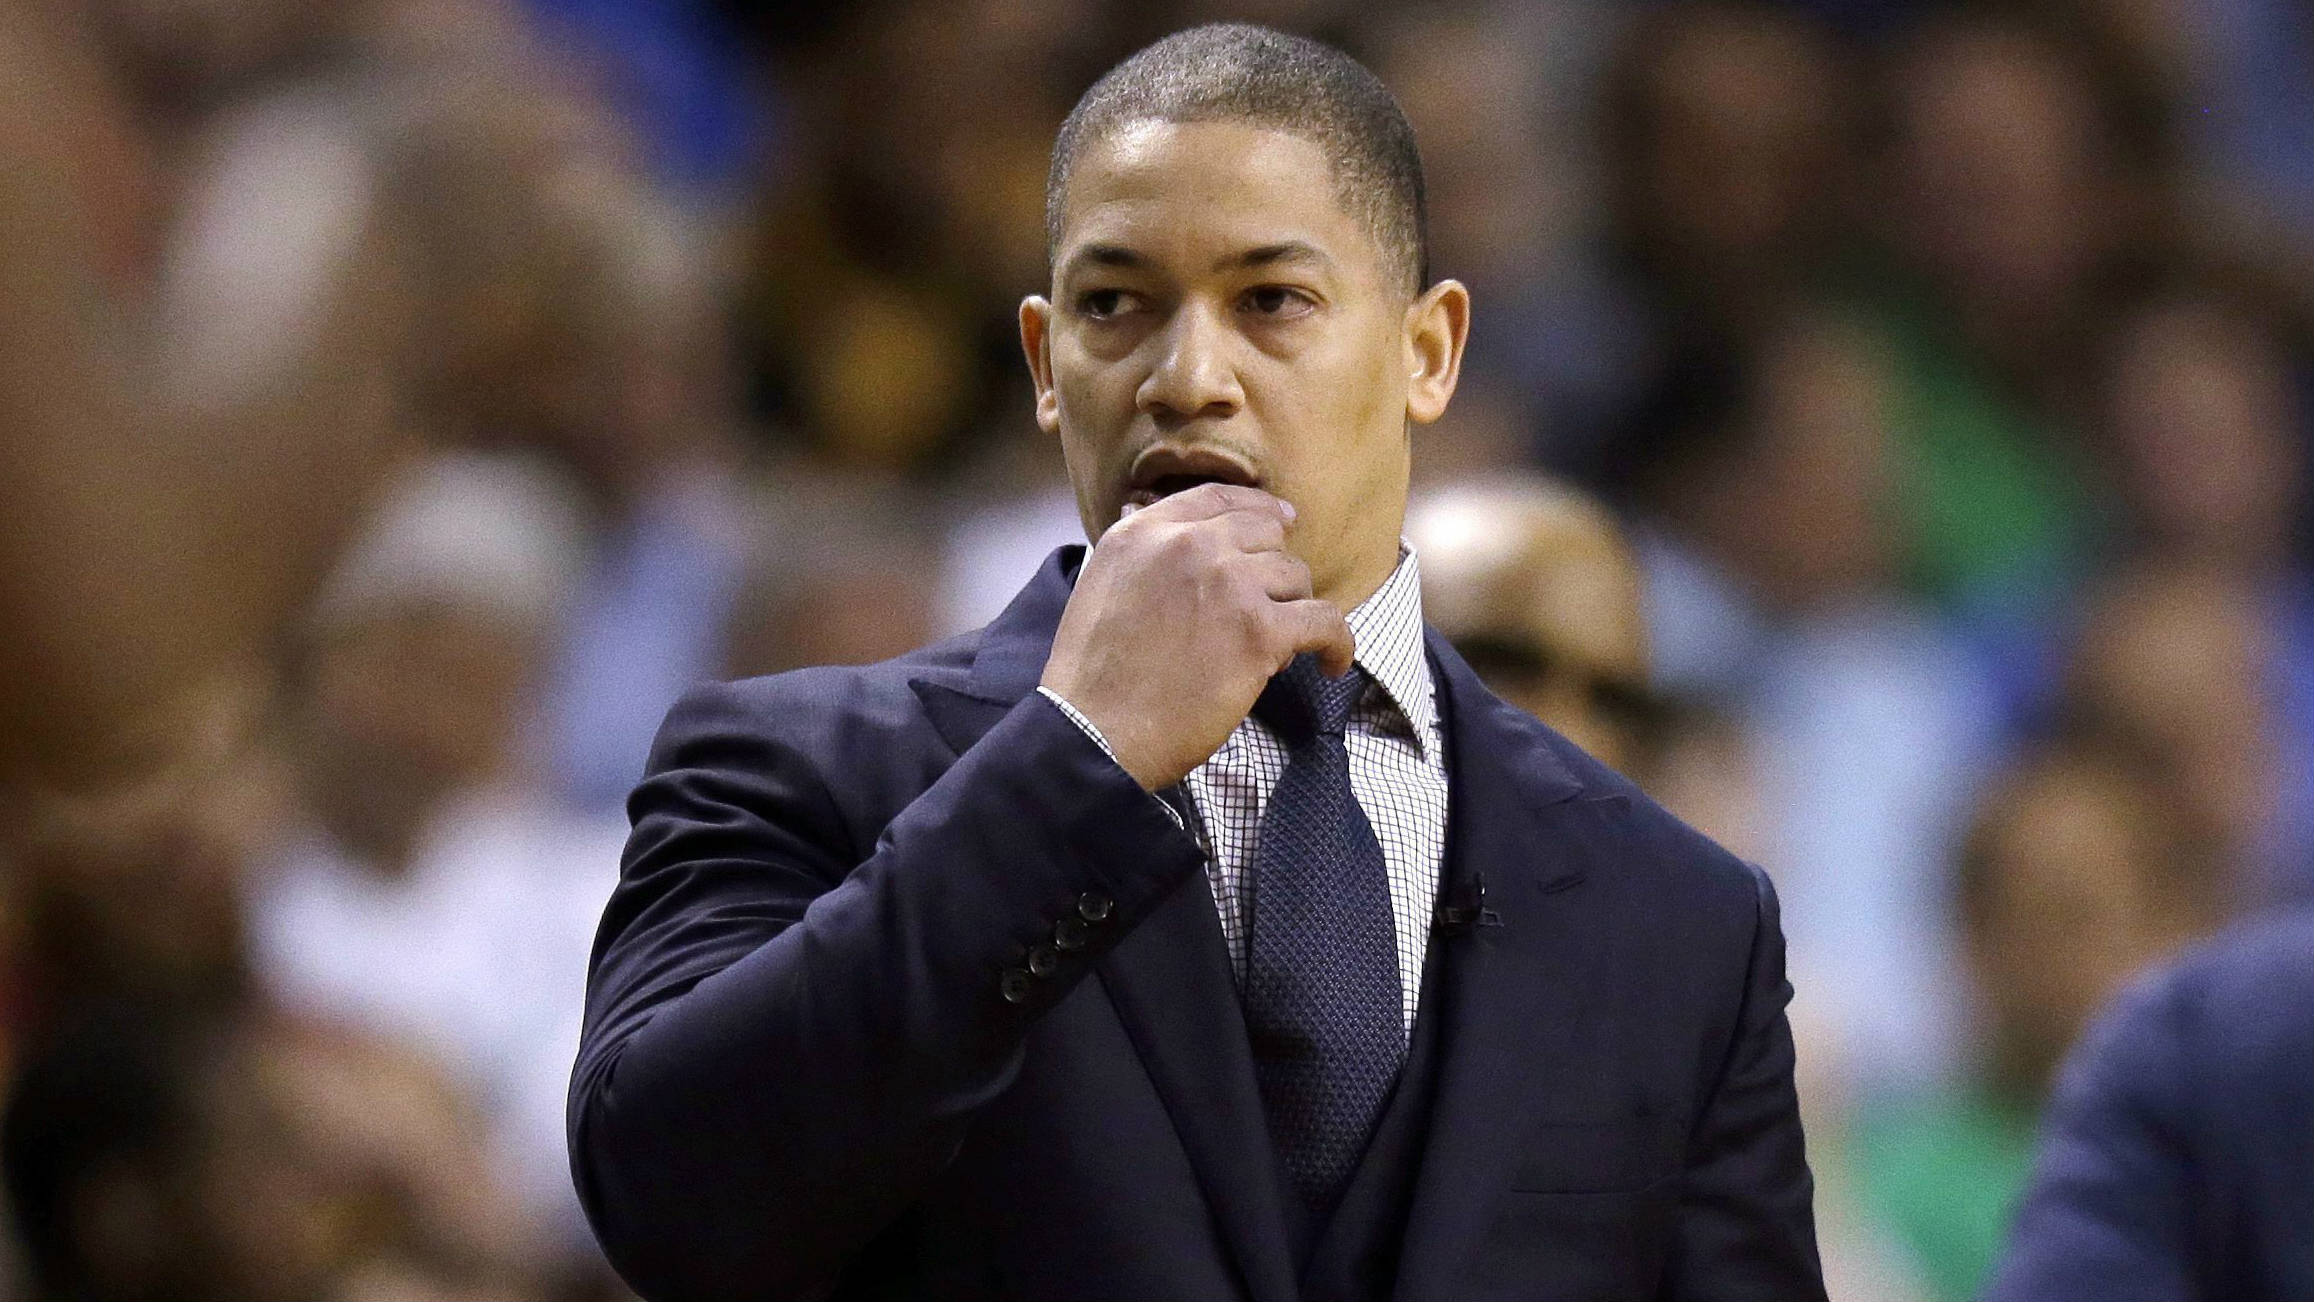 Cleveland-Cavaliers-coach-Tyronn-Lue-watches-from-the-sideline-during-the-third-quarter-of-Game-1-of-the-NBA-basketball-Eastern-Conference-finals-against-the-Boston-Celtics,-Wednesday,-May-17,-2017,-in-Boston.-(Charles-Krupa/AP)